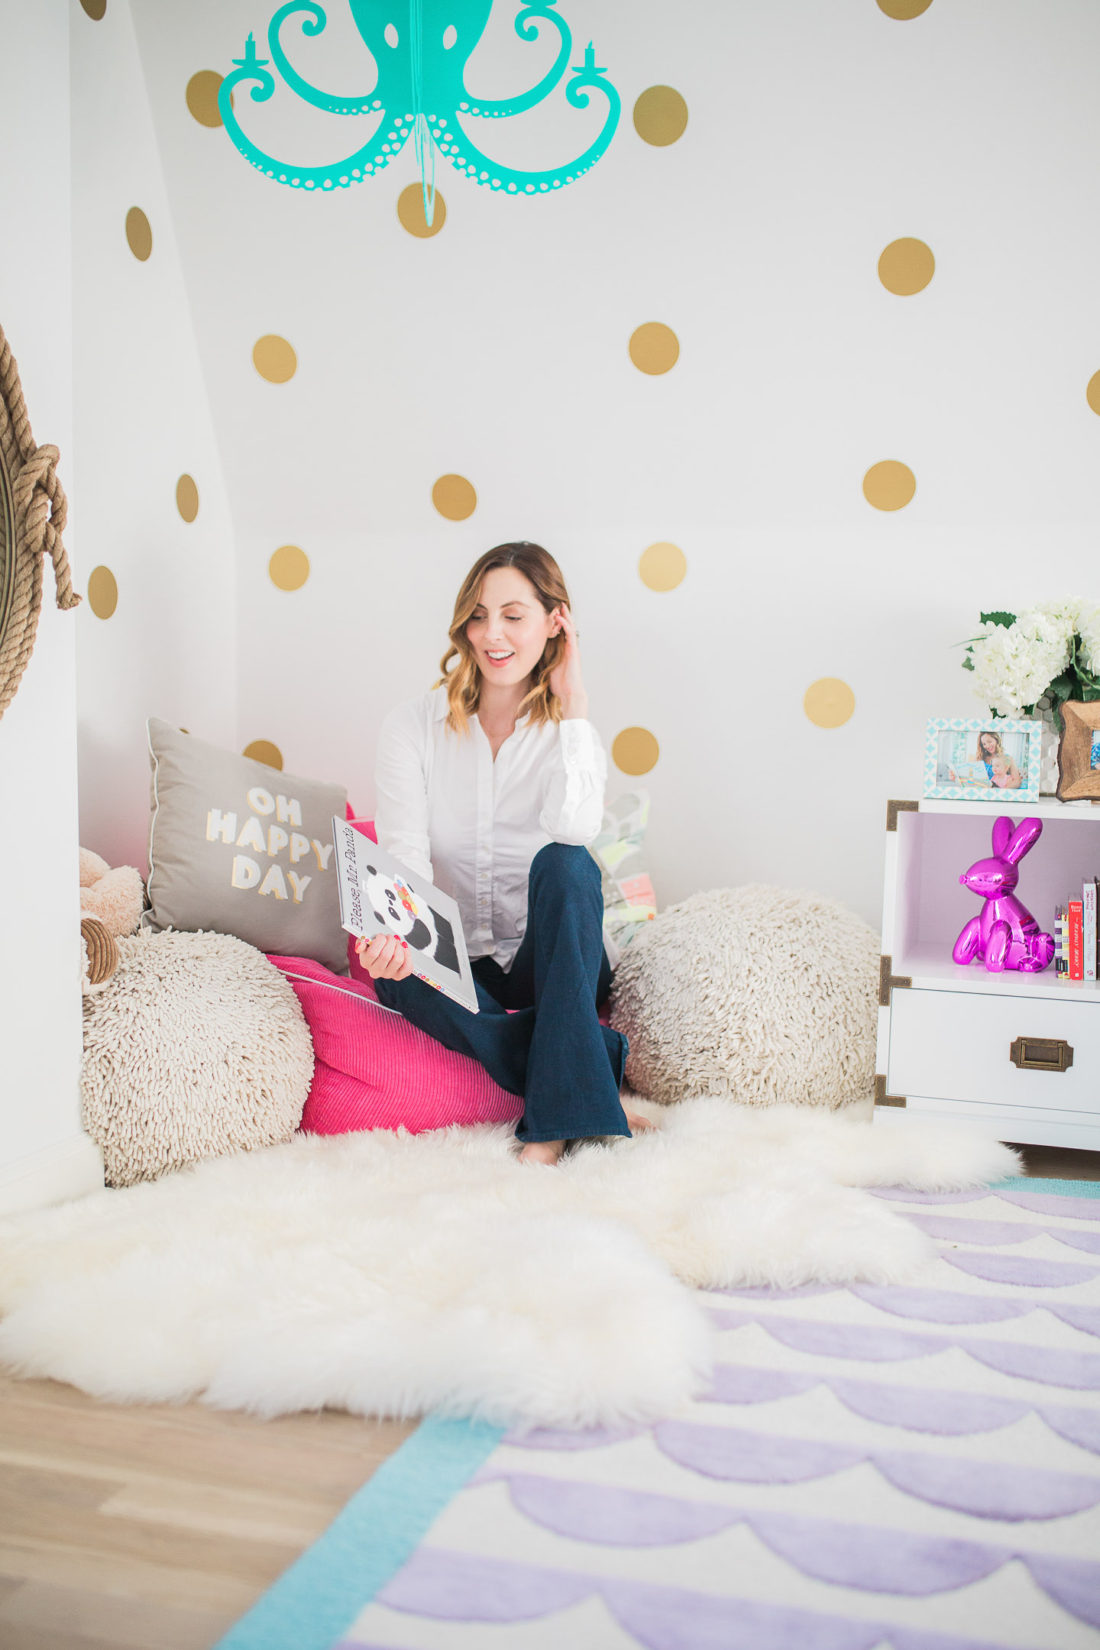 Eva Amurri Martino pictured in the room she designed for her daughter Marlowe in their connecticut home